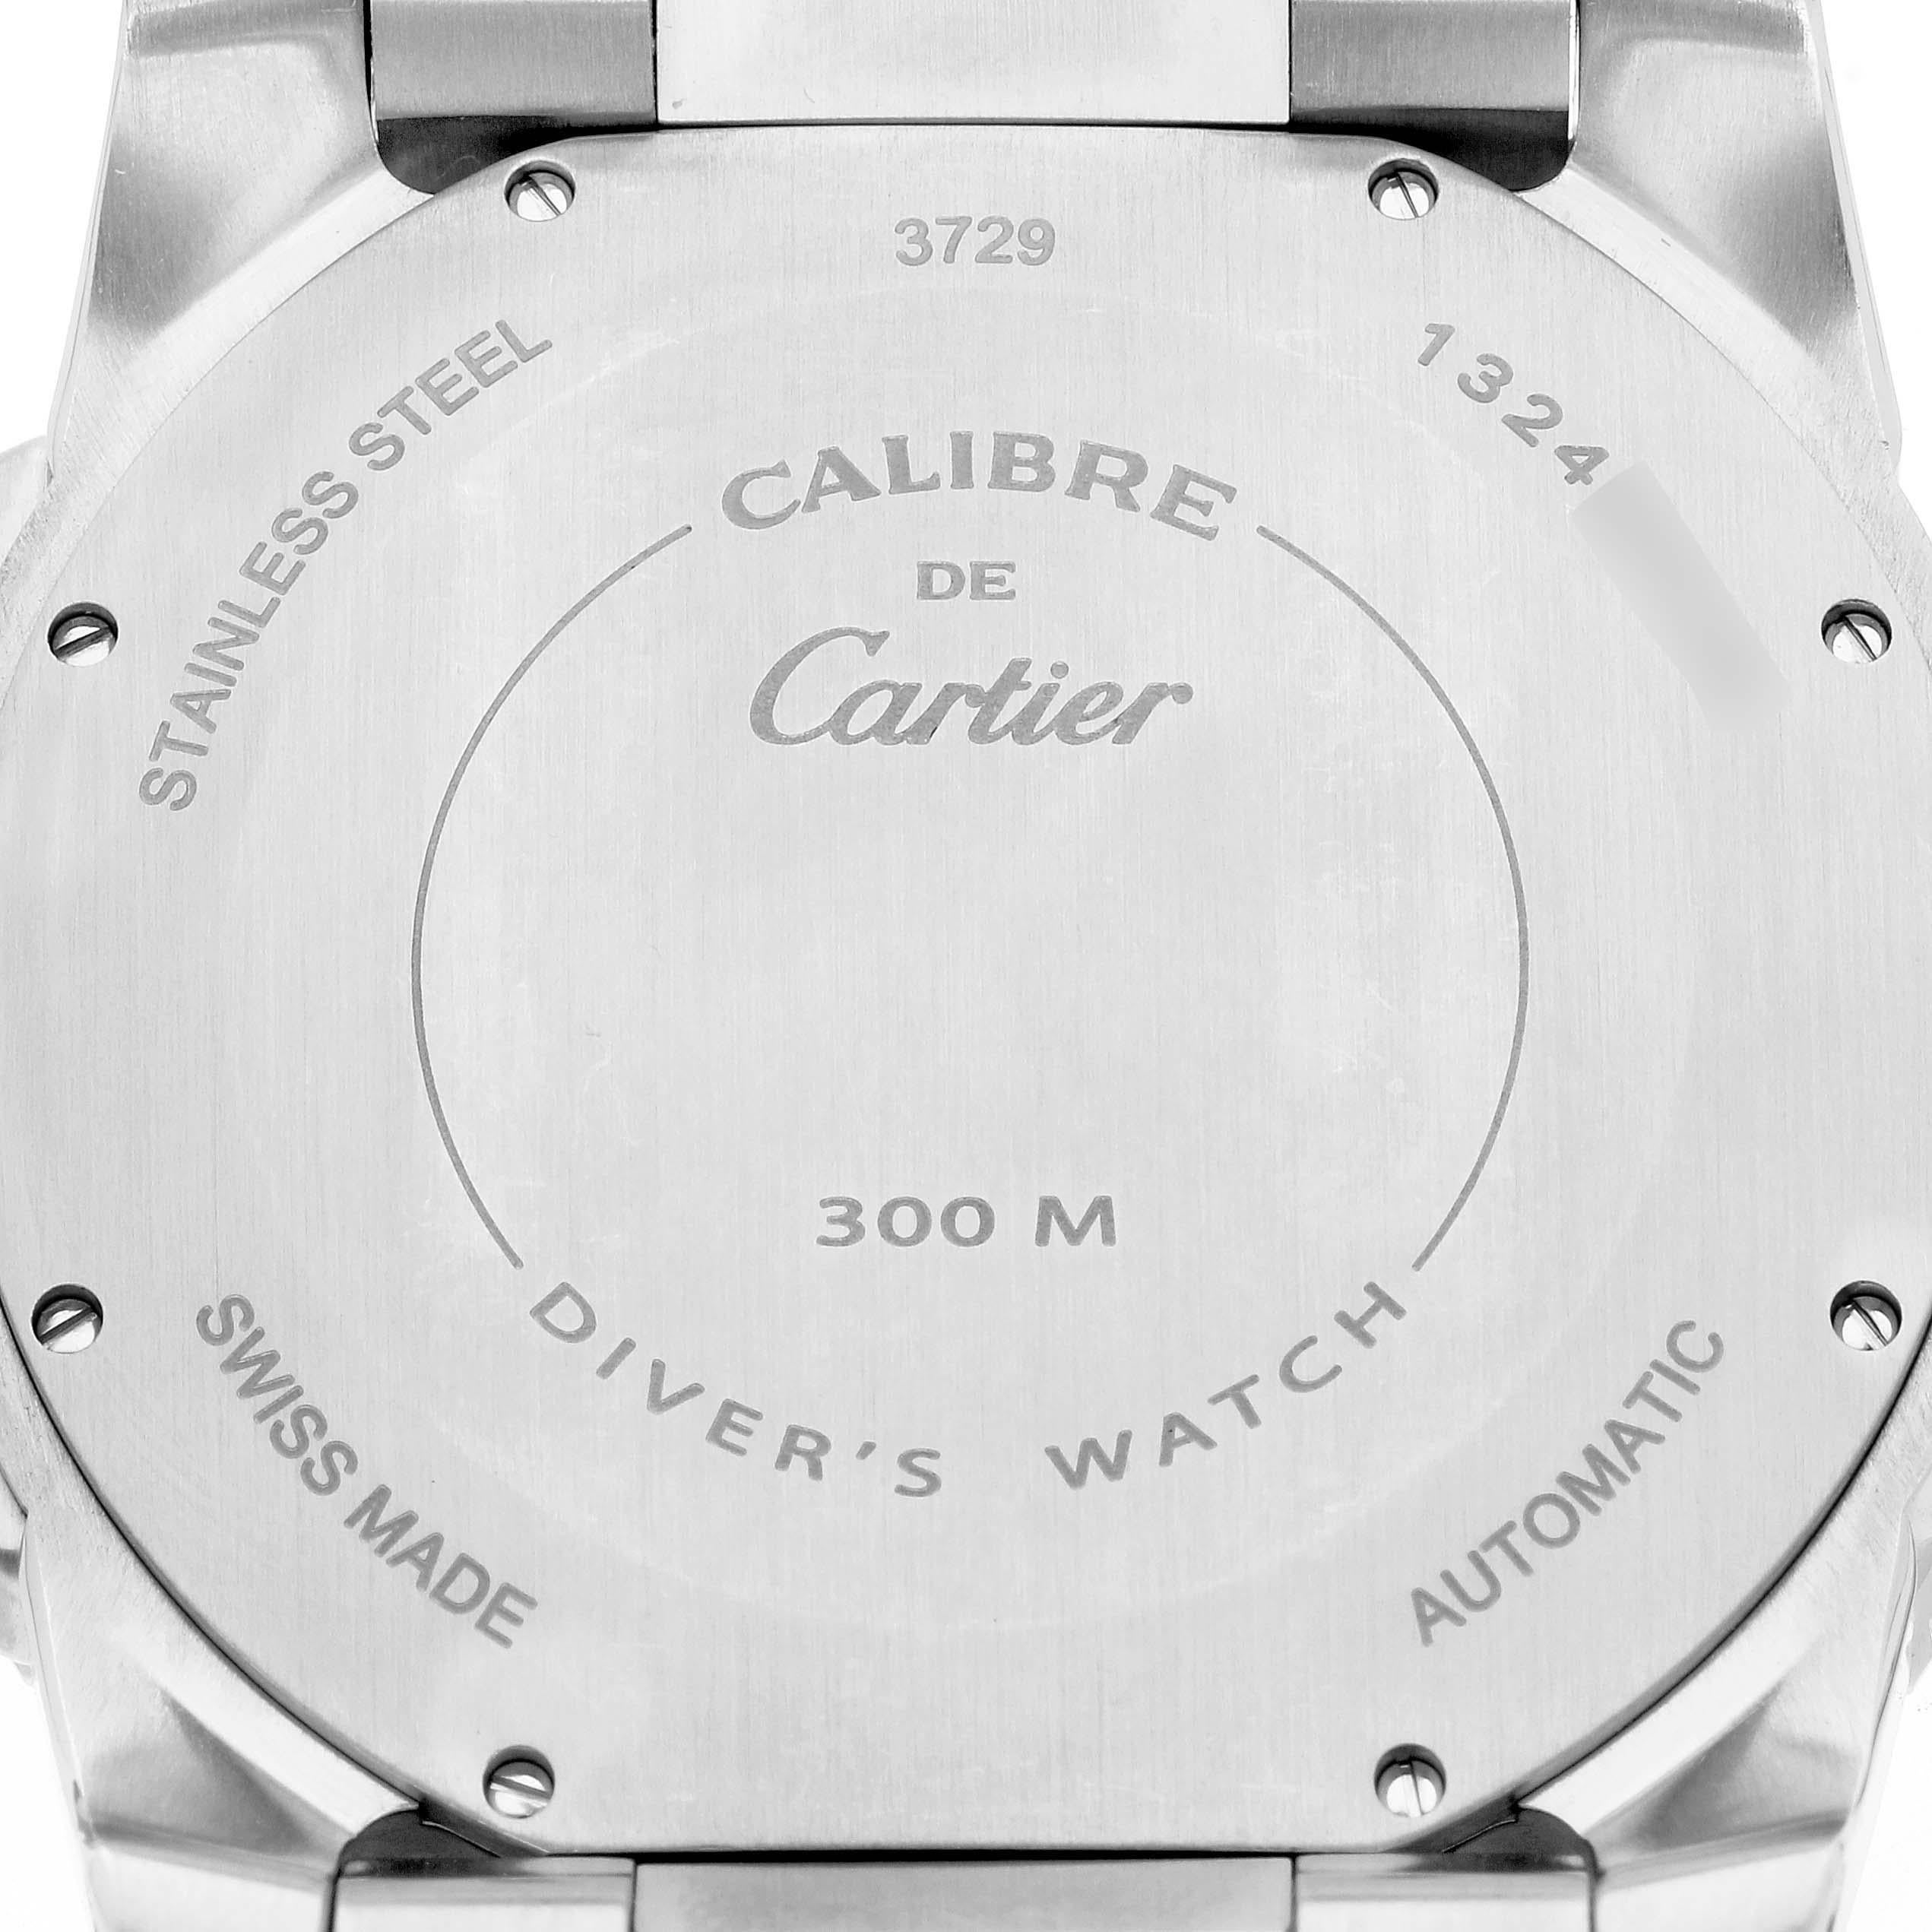 Cartier Calibre Diver Steel Rose Gold Black Dial Mens Watch W7100054. Automatic self-winding movement. Stainless steel round case 42.0 mm in diameter. 18K rose gold crown set with faceted blue spinel. Case thickness: 11 mm. Black ADLC coated